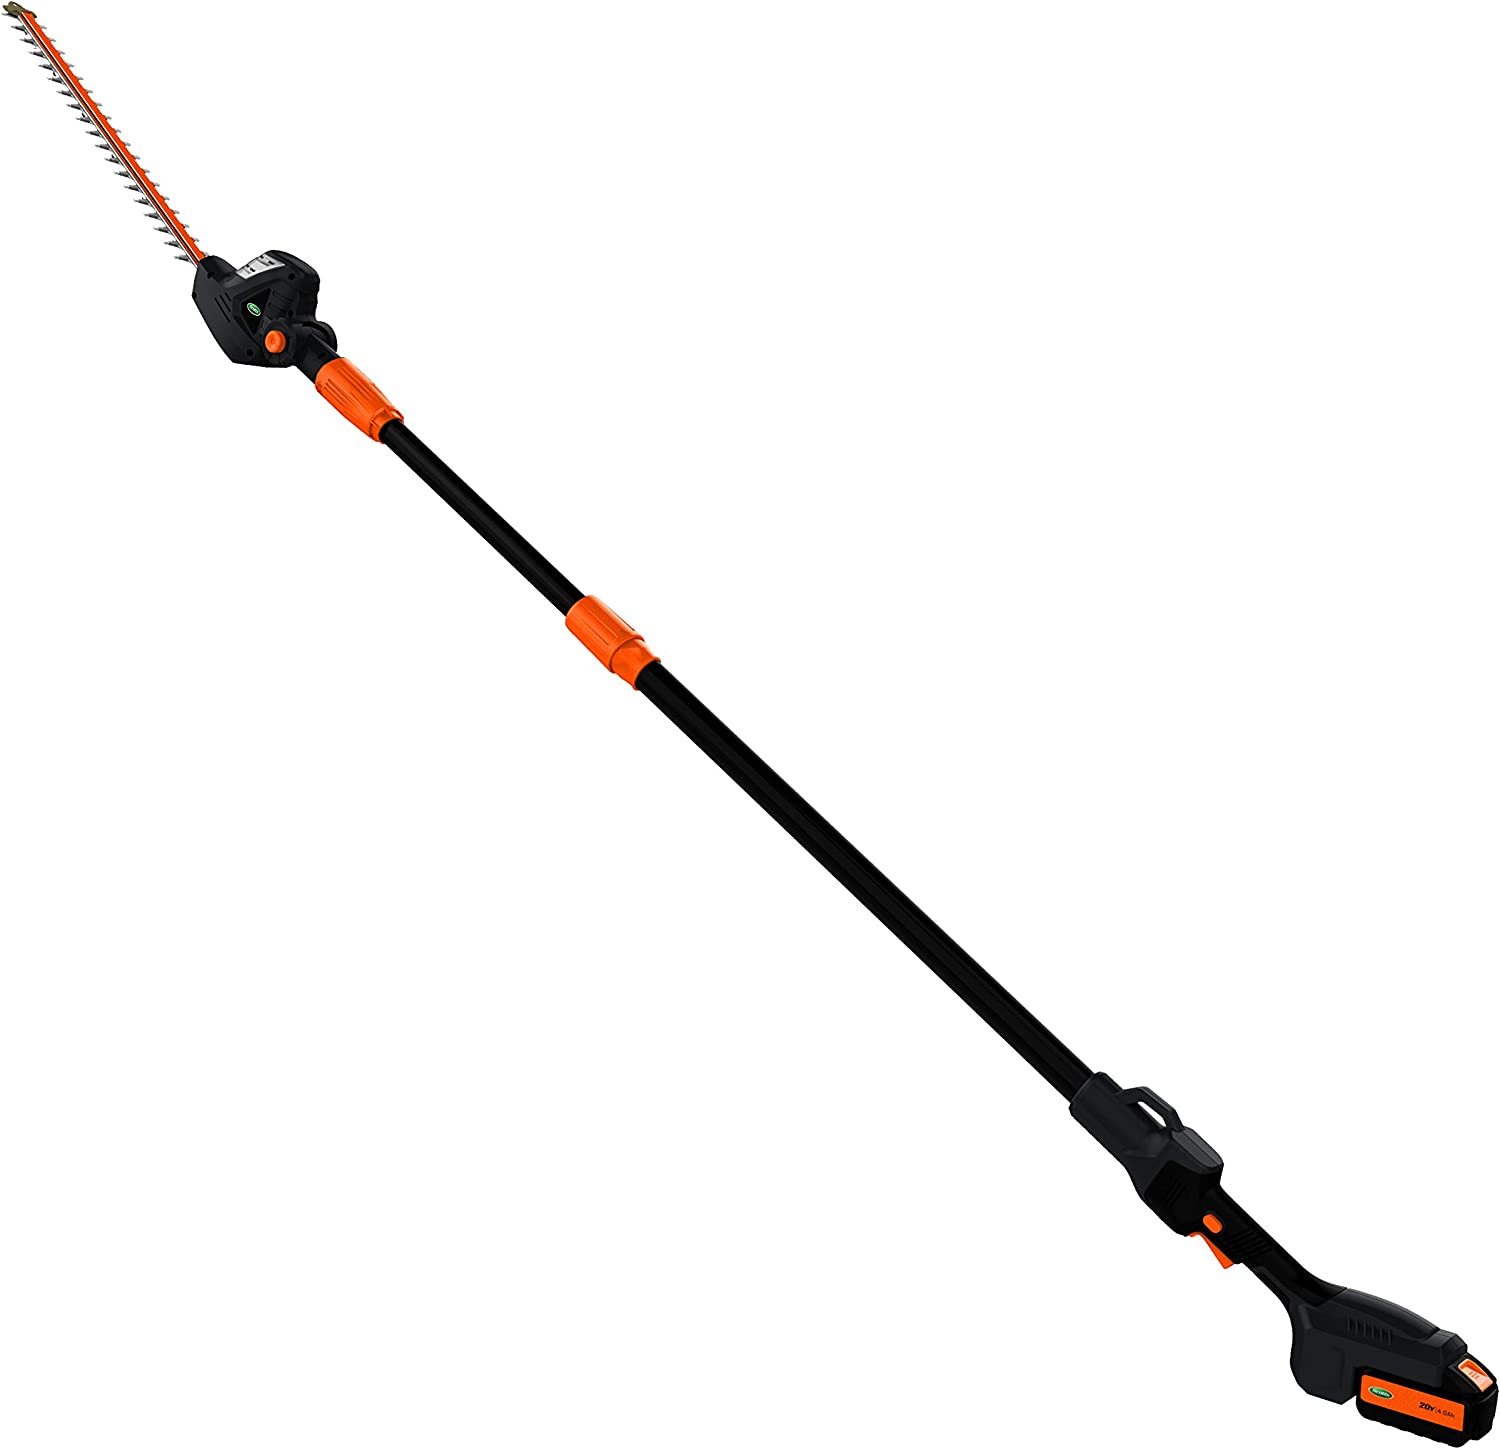 Scotts Lpht12122S 20-Volt 22-Inch Cordless Pole Hedge Trimmer With Included Fast - $155.99